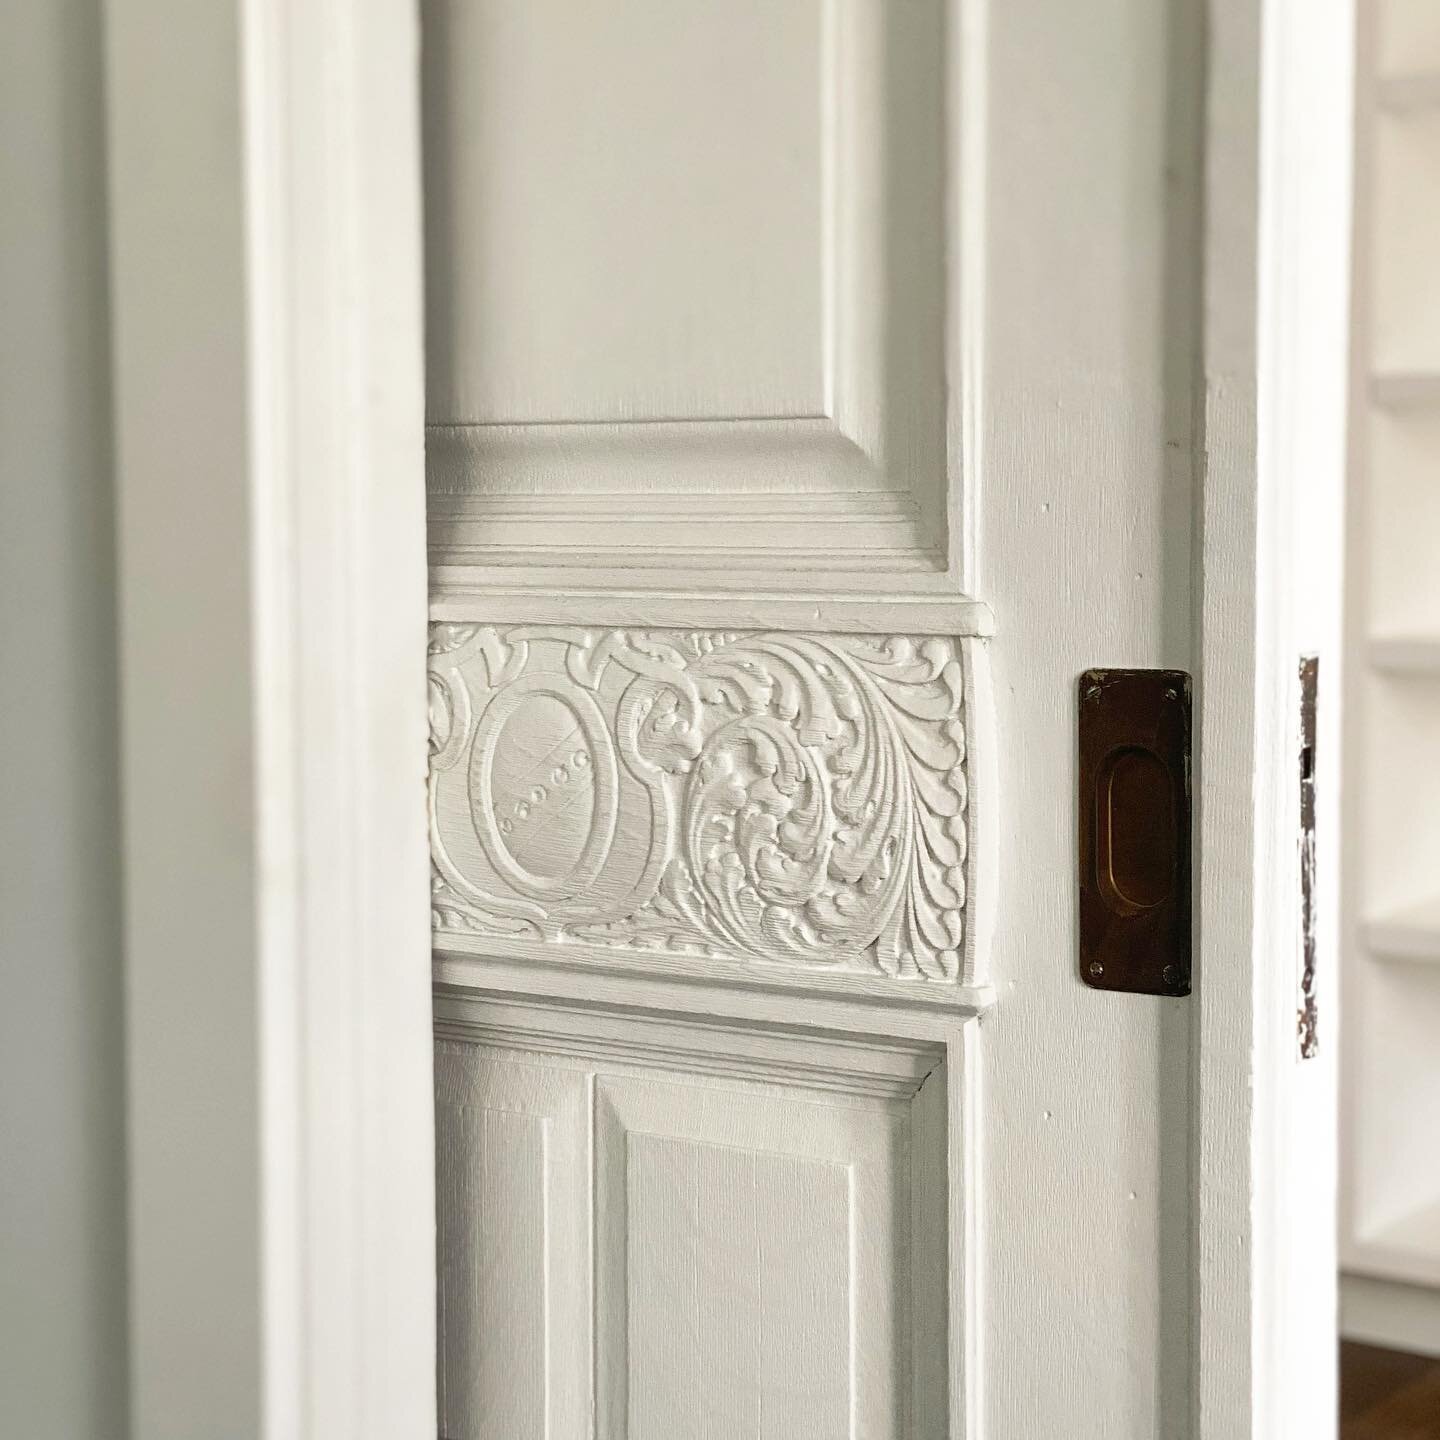 What a lovely, old sliding door! And it&rsquo;s a double door.
Looking forward to bringing its carved details back to live!
.
.
#interiordesign #doordesign #oldhouselove #thisoldhouse #renovationproject #interiordesign #interiordesignproject #olddoor